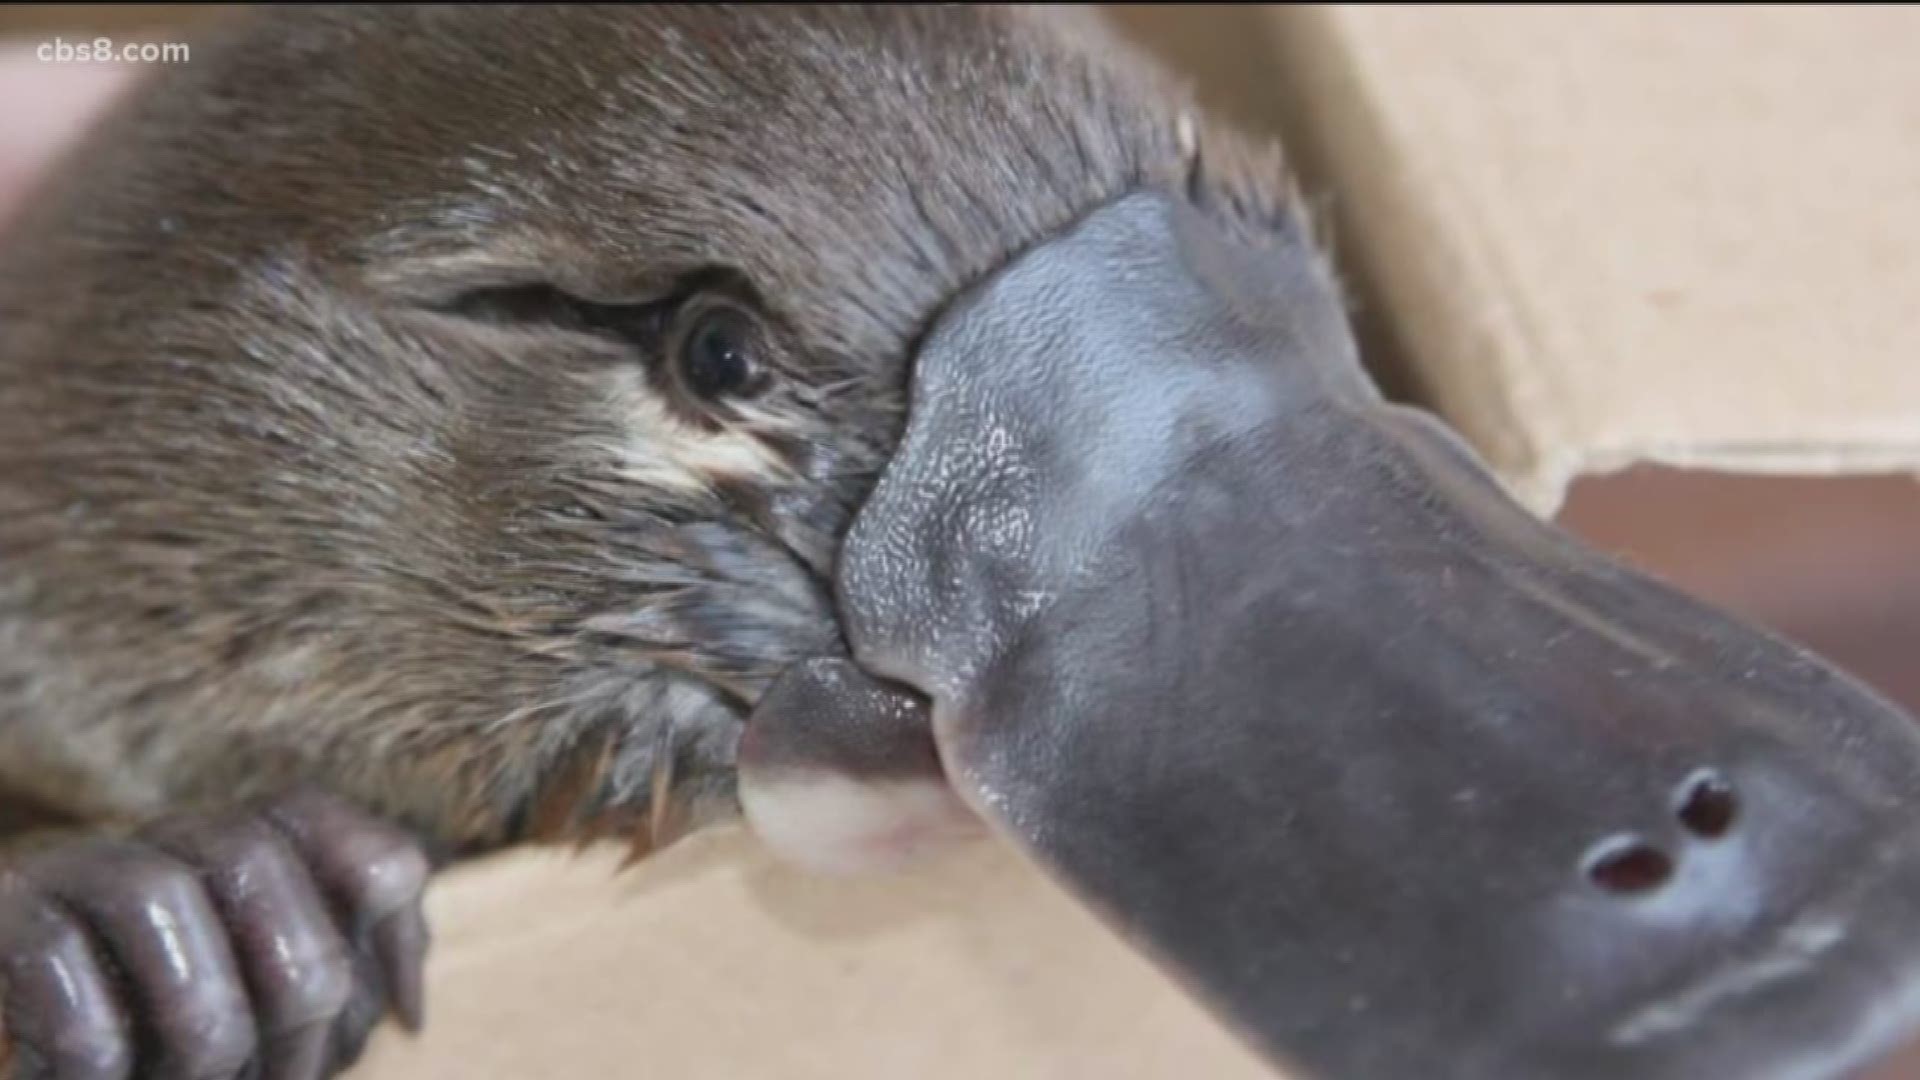 The animals will live in a new habitat at the Safari Park and are the only platypuses that are on display outside of Australia.